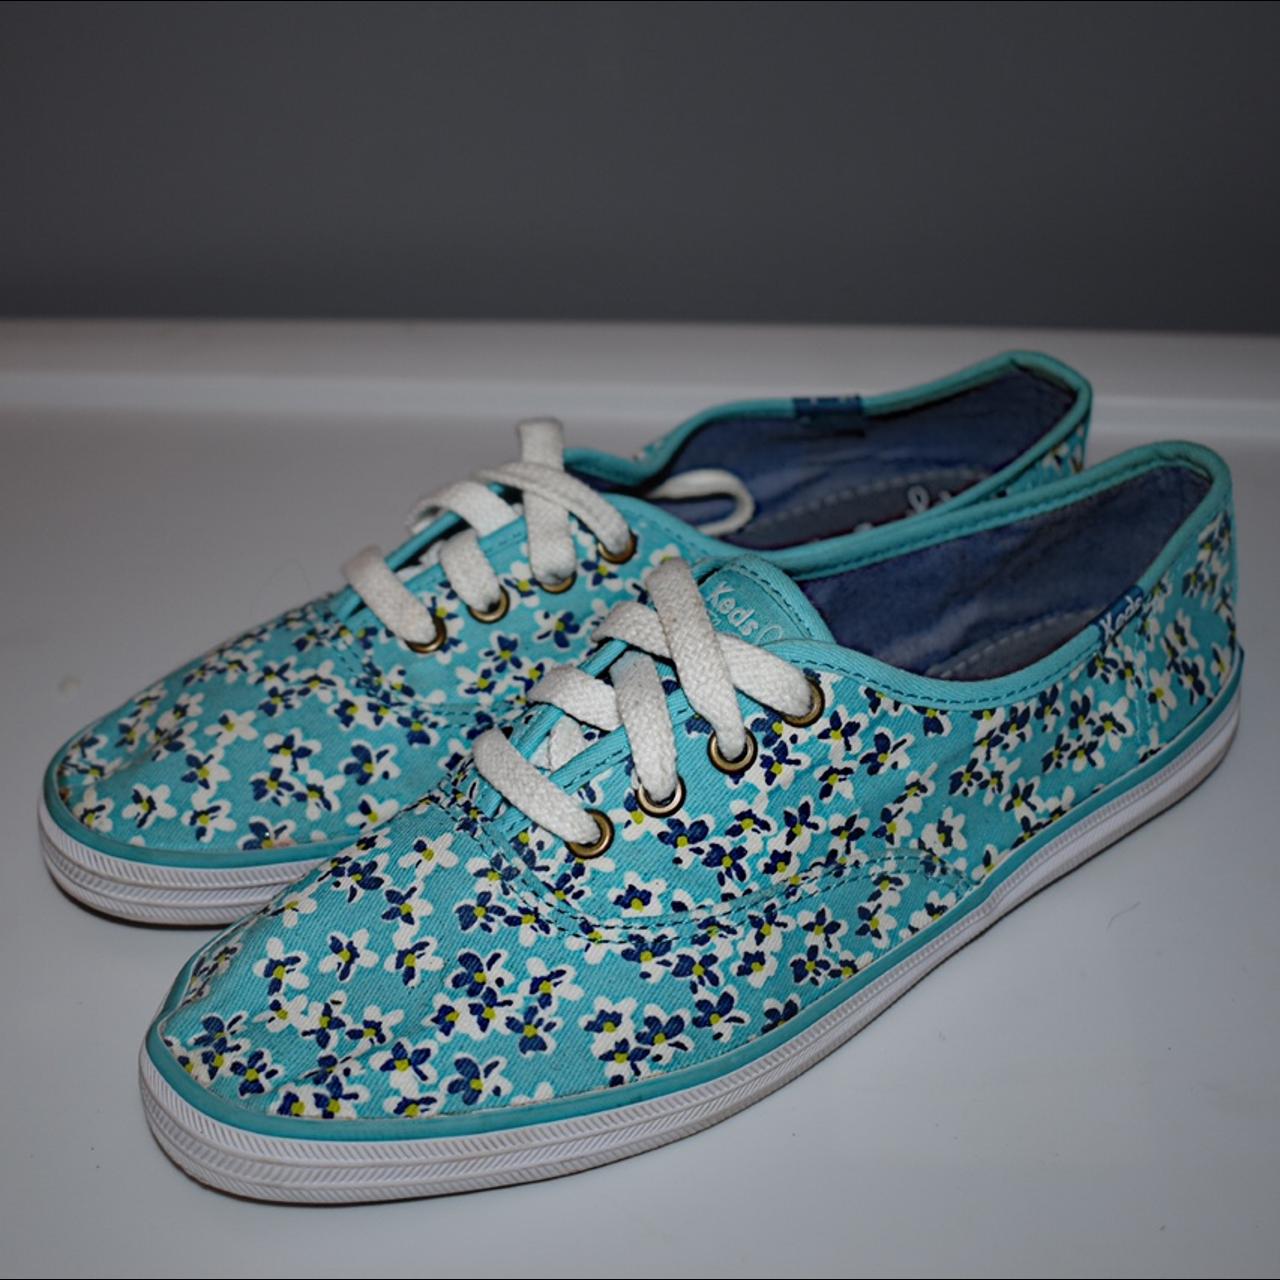 Taylor Swift Turquoise Floral Keds Shoes These were... - Depop